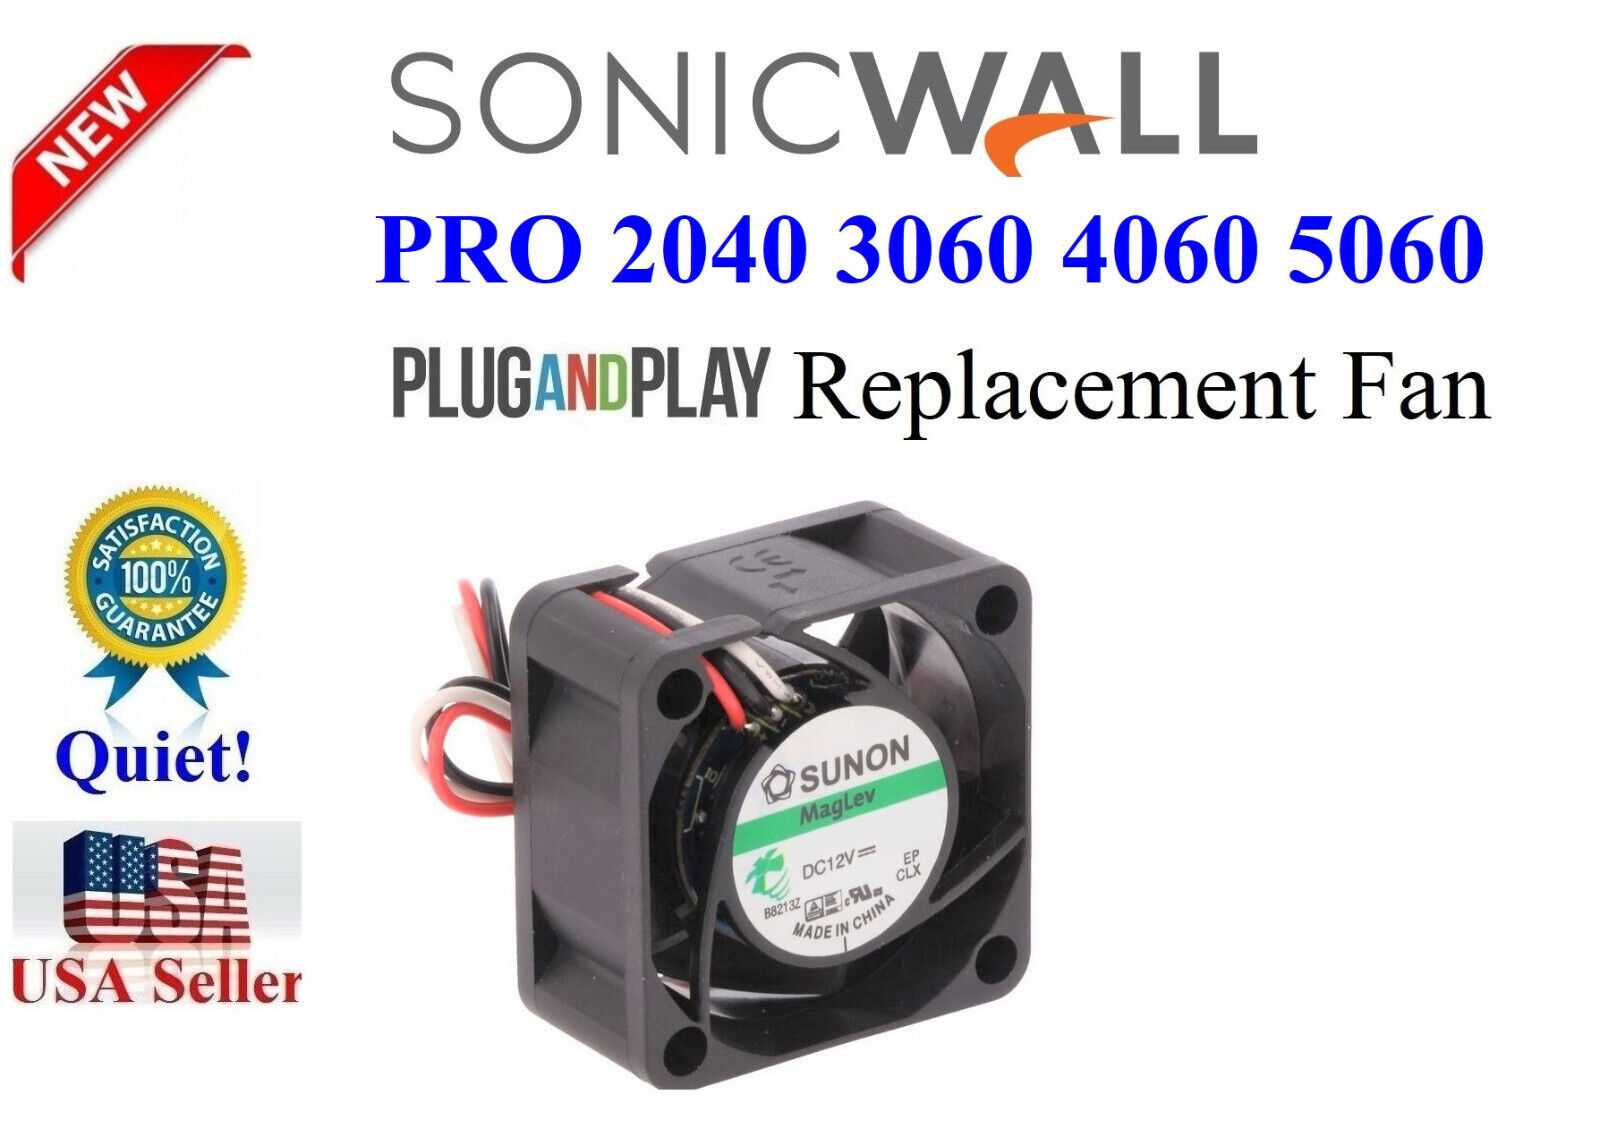 New **Quiet** Version Fan for SonicWALL PRO 2040 3060 4060 5060